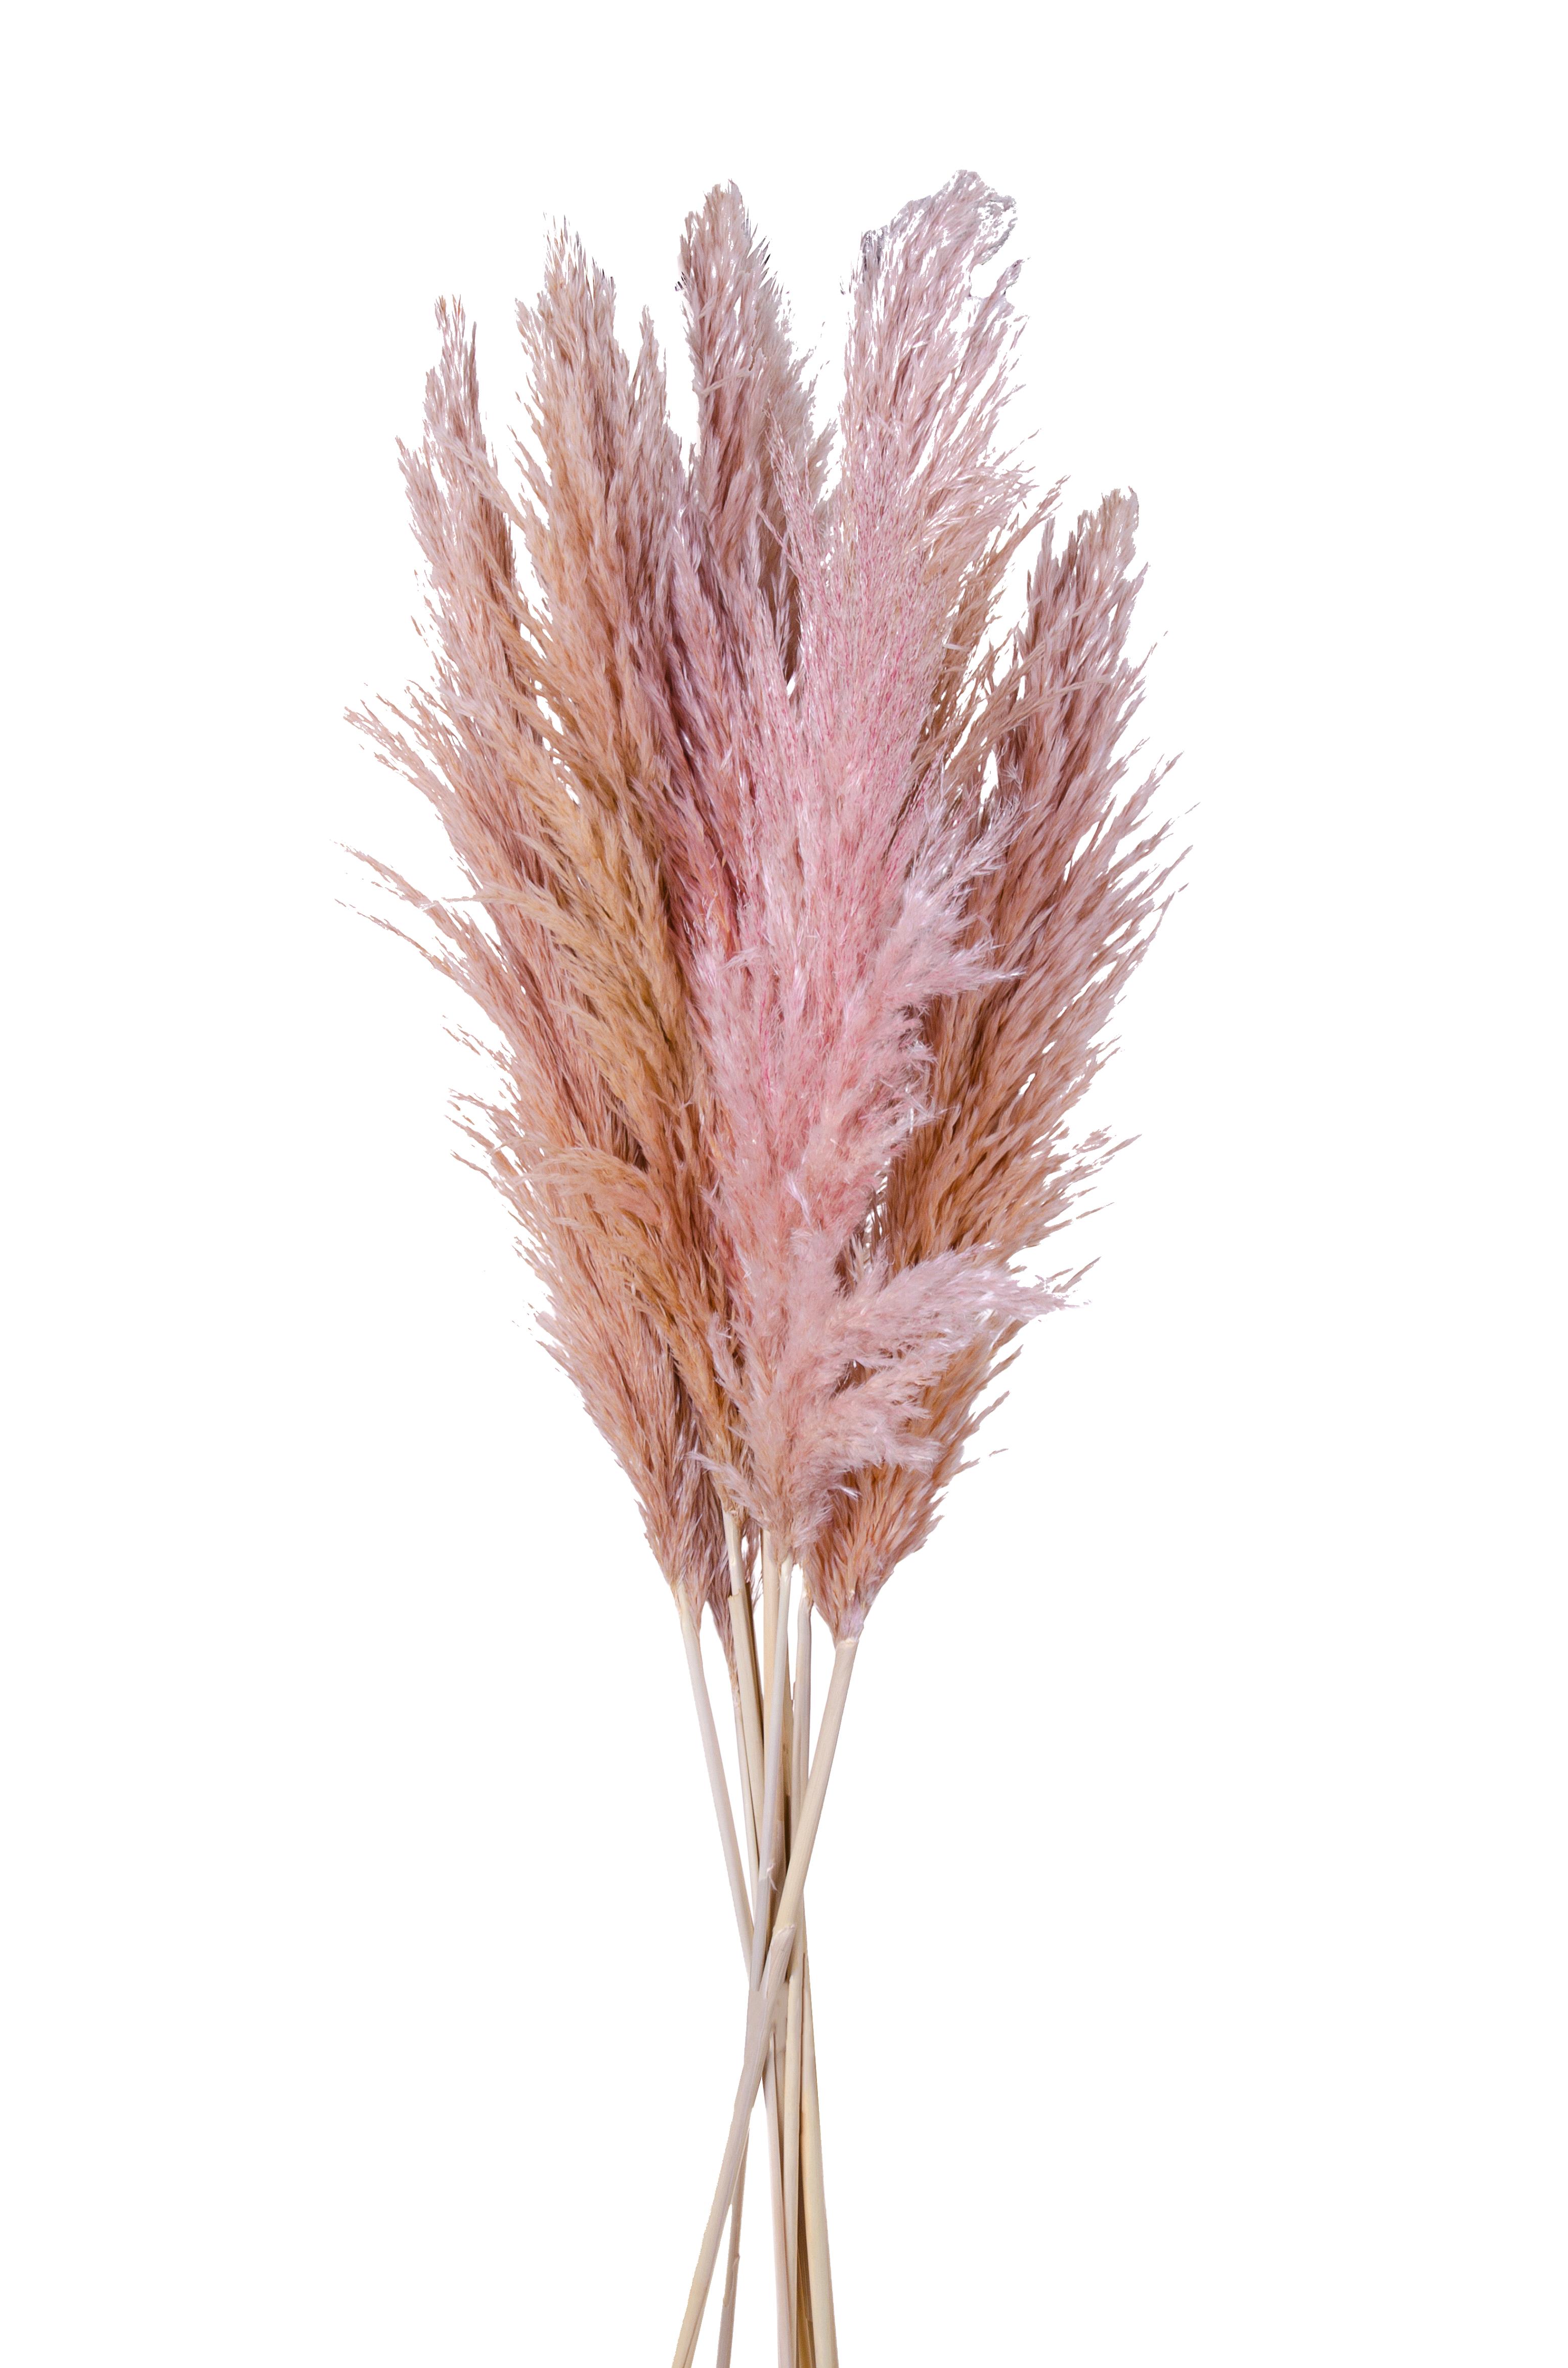 NATURAL PRODUCTS DRIED FLOWERS AND ERBS, NATURAL GRASS, PAMPAS SPAG. 1 PZ 110/180 CM SAC NAT/PIN